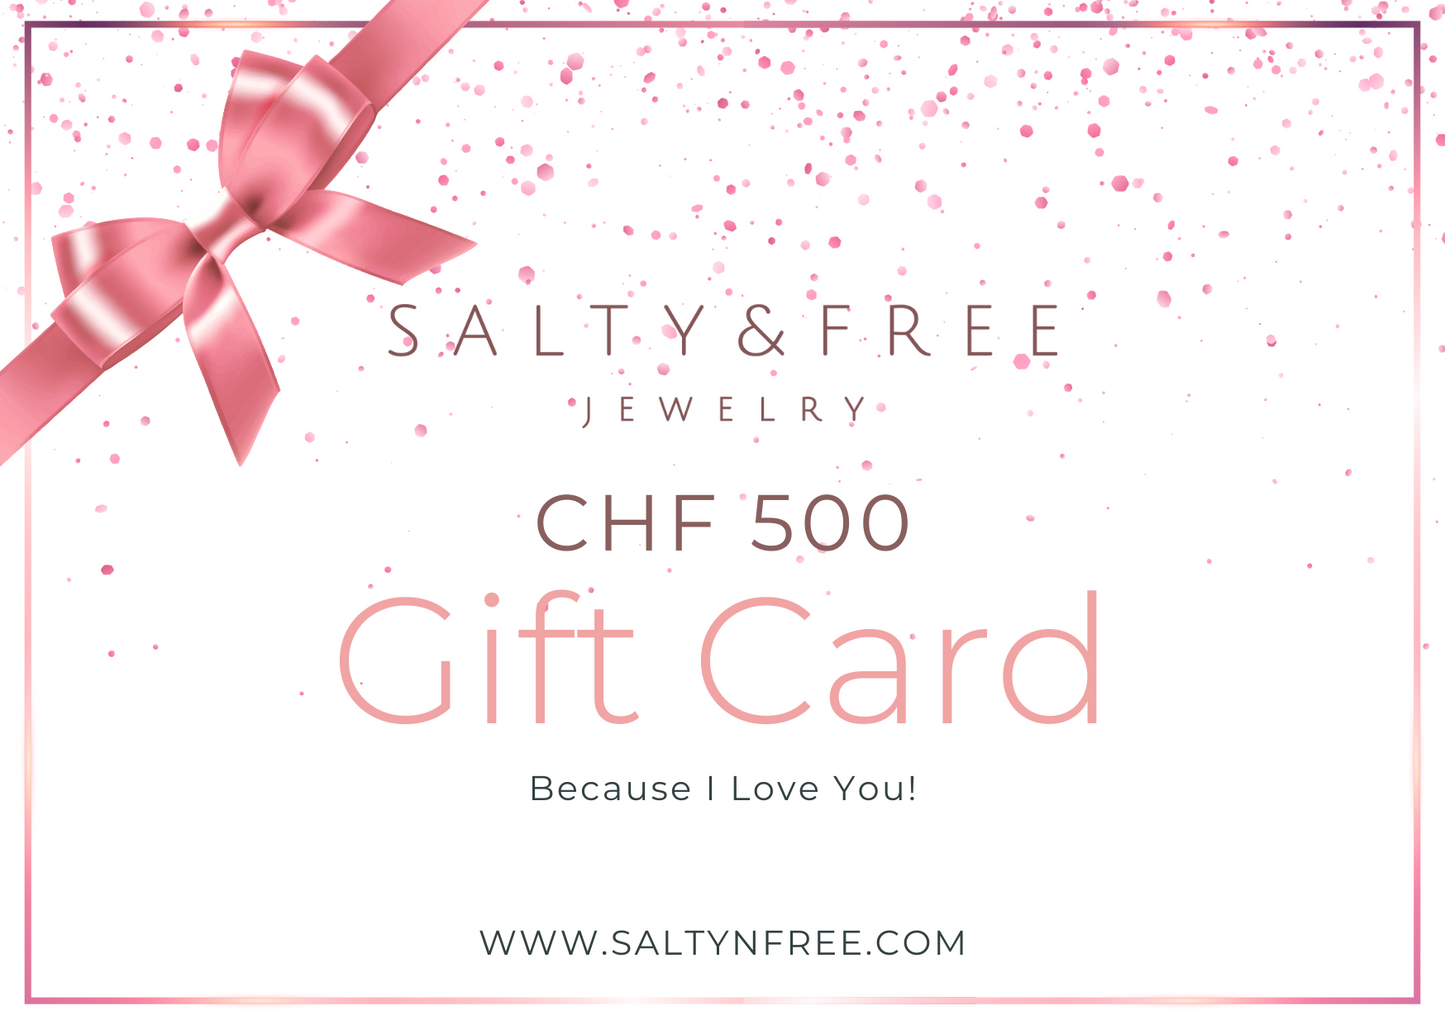 Salty & Free Gift Card "Because I Love You!"